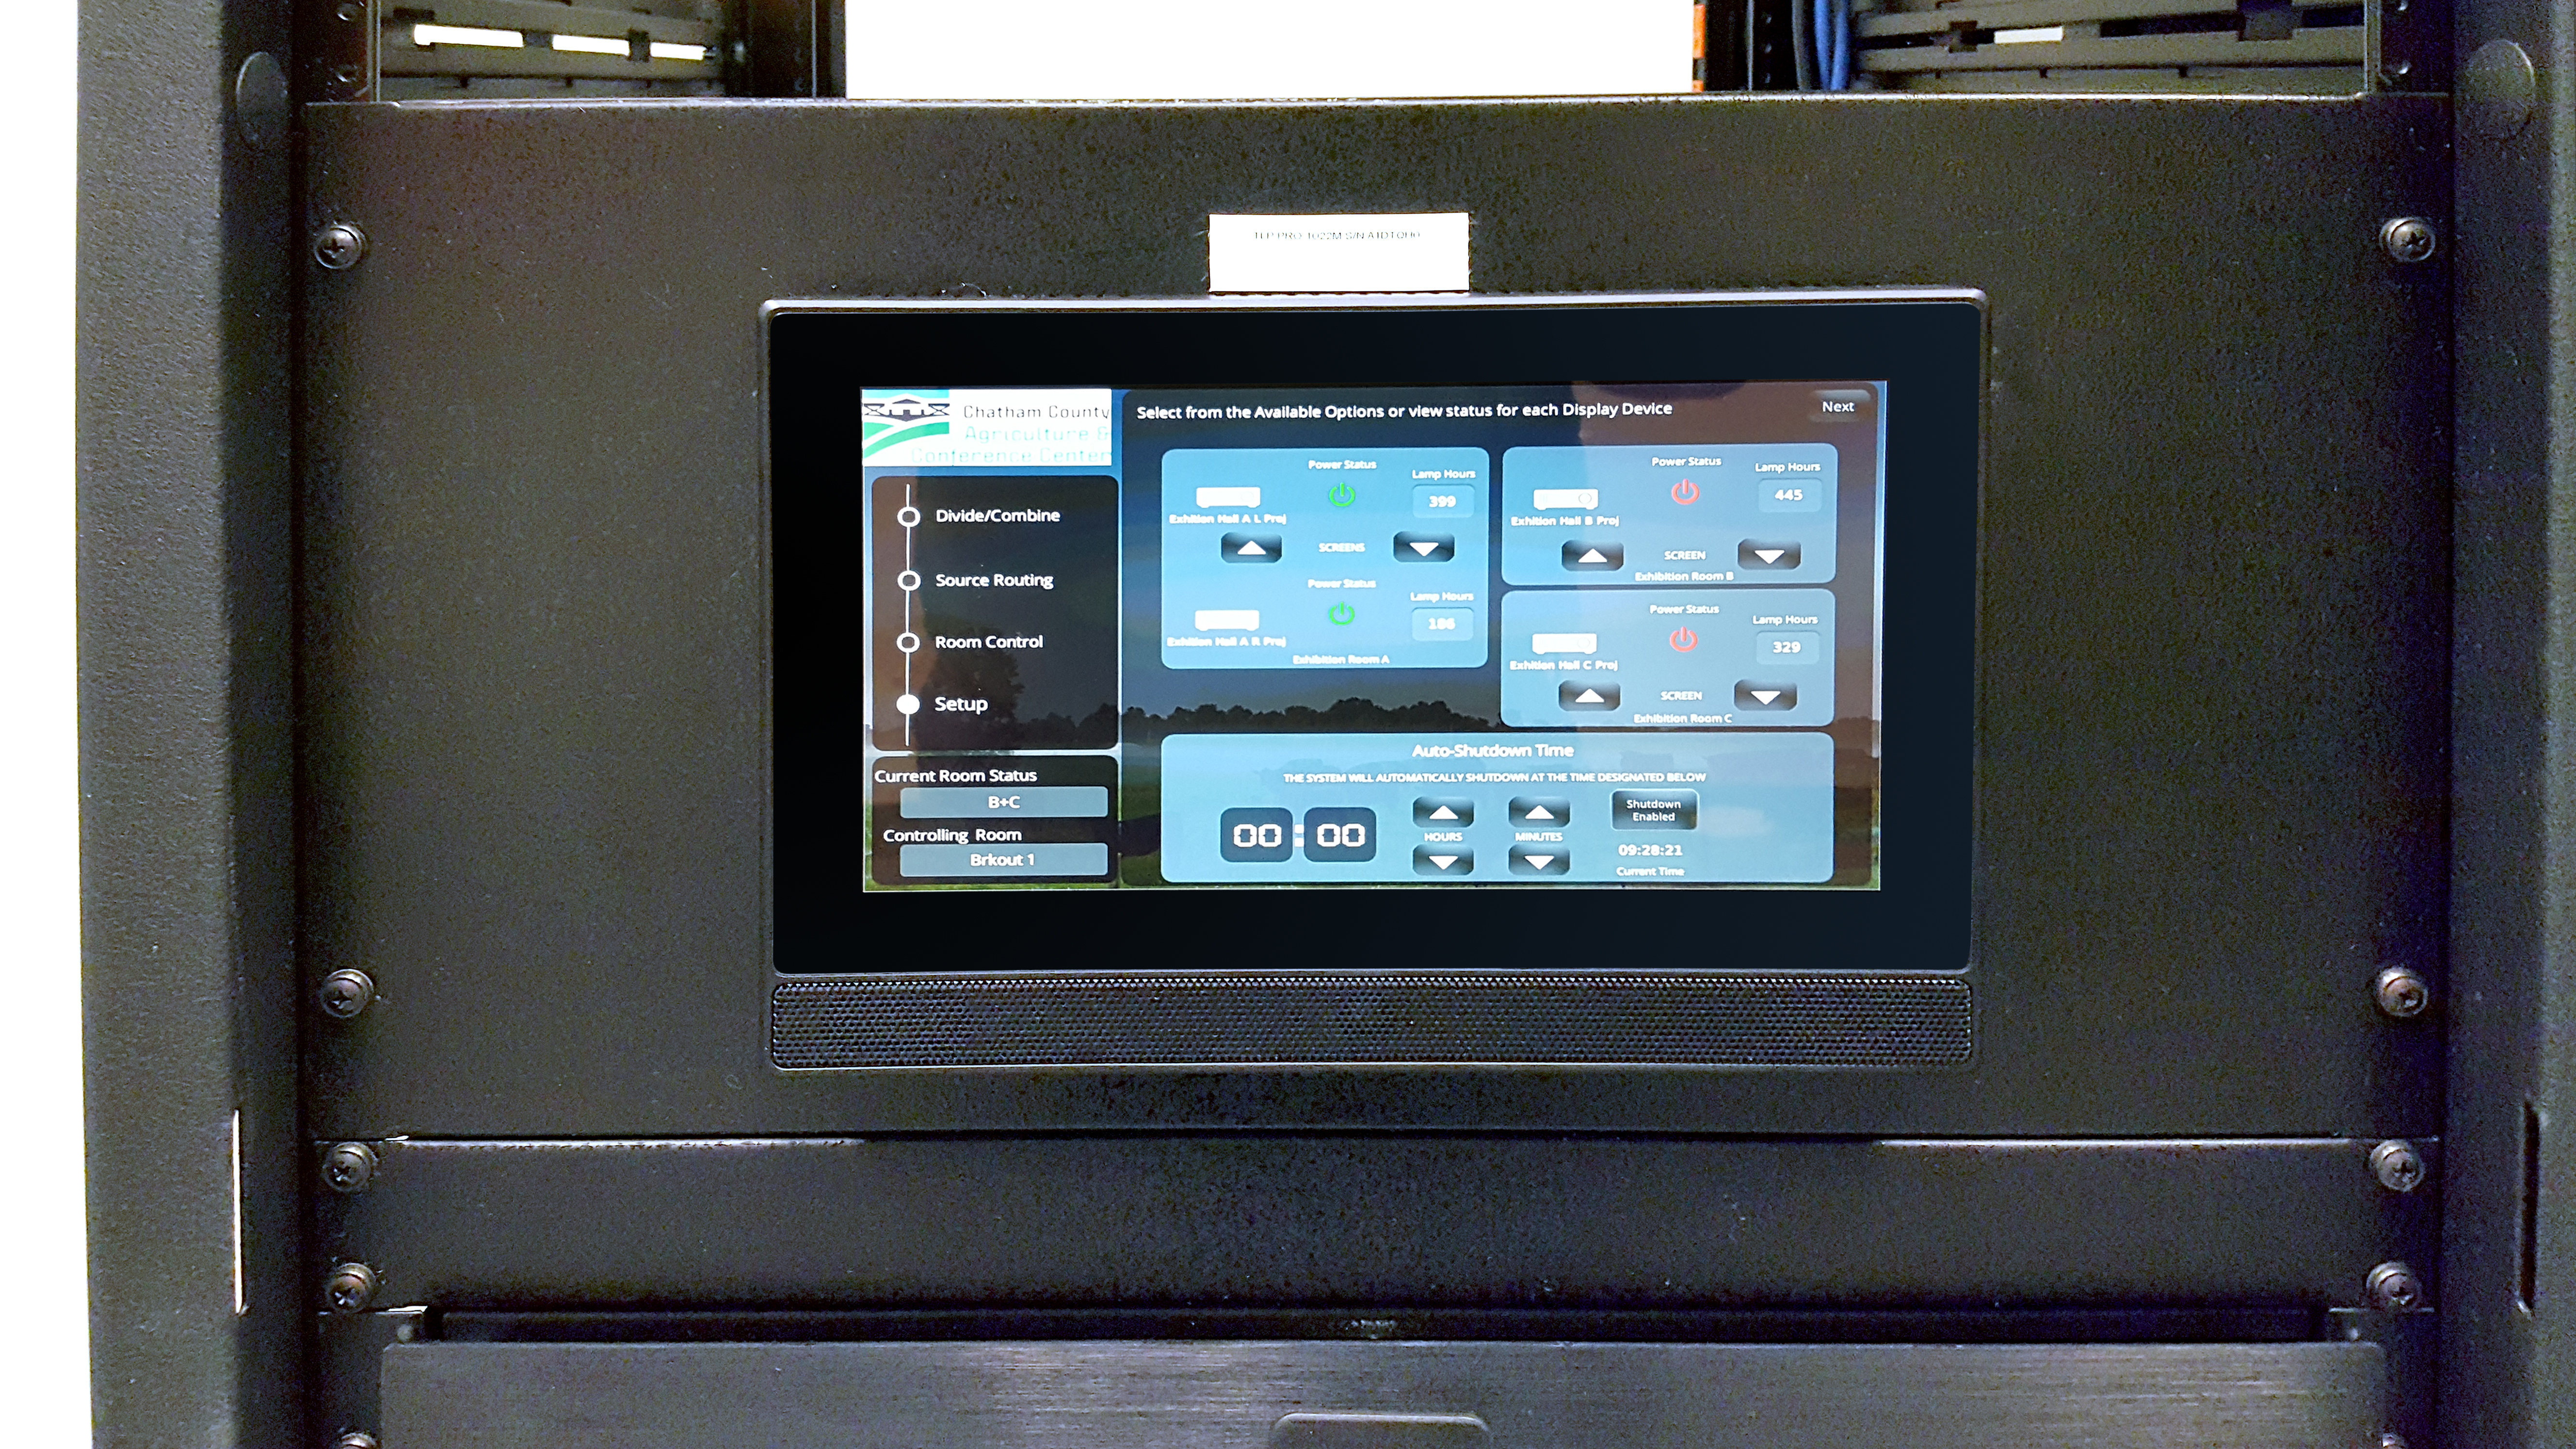 This Extron TLP Pro 1022M 10" Wall Mount TouchLink Pro Touchpanel displays the custom interface designed to control I/O source devices available on CCACC's XTP system.